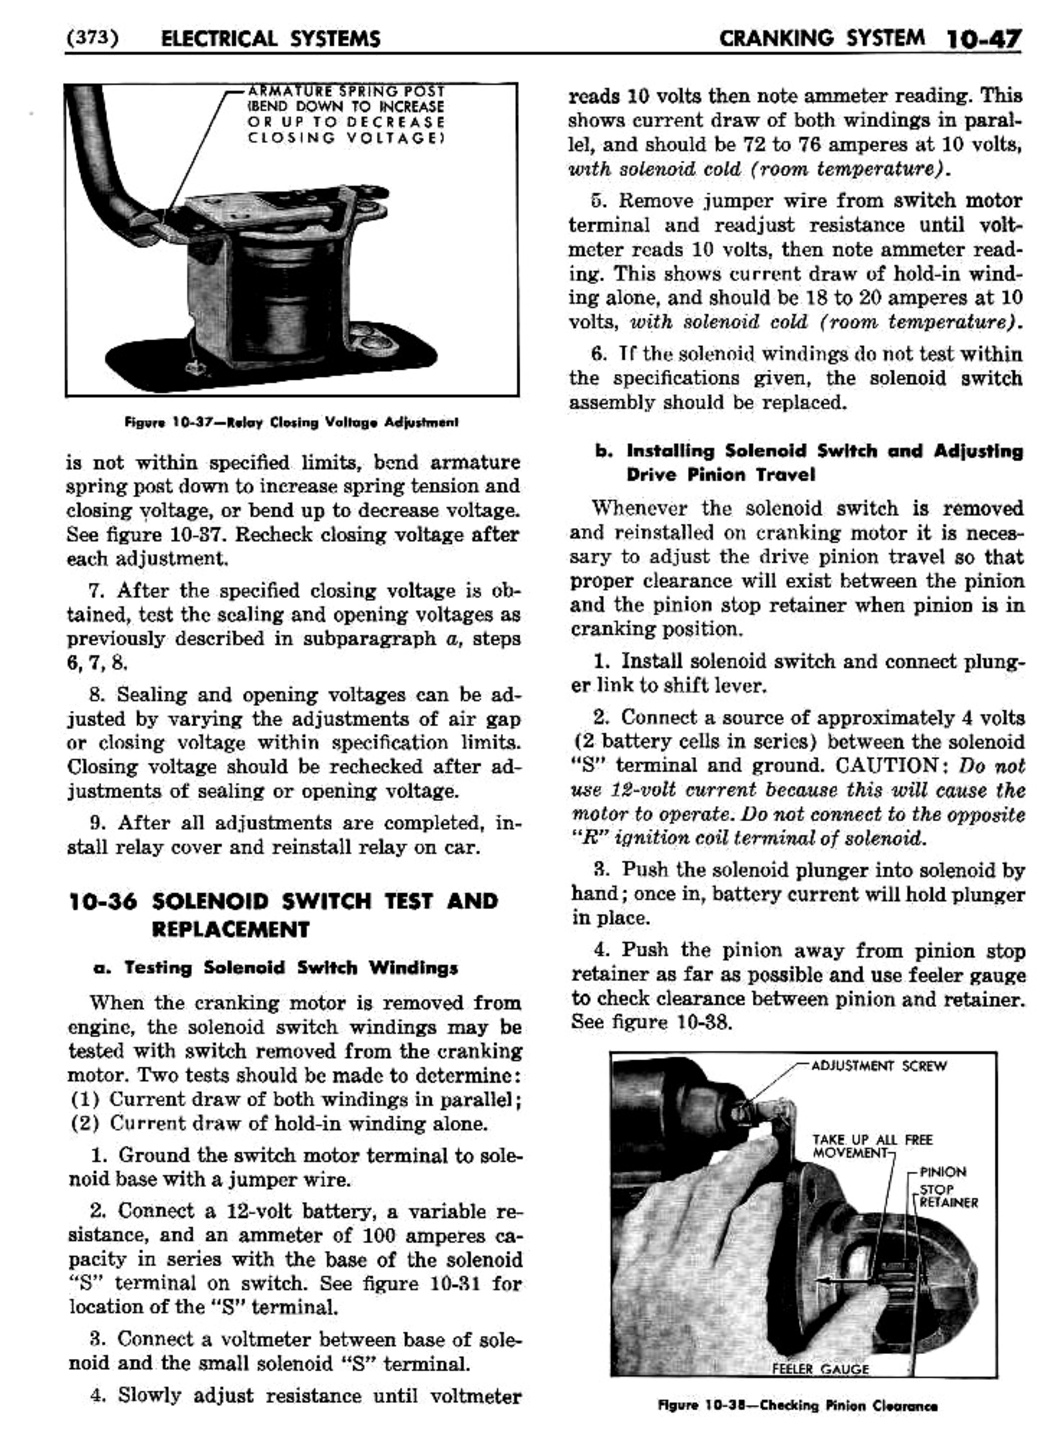 n_11 1956 Buick Shop Manual - Electrical Systems-047-047.jpg